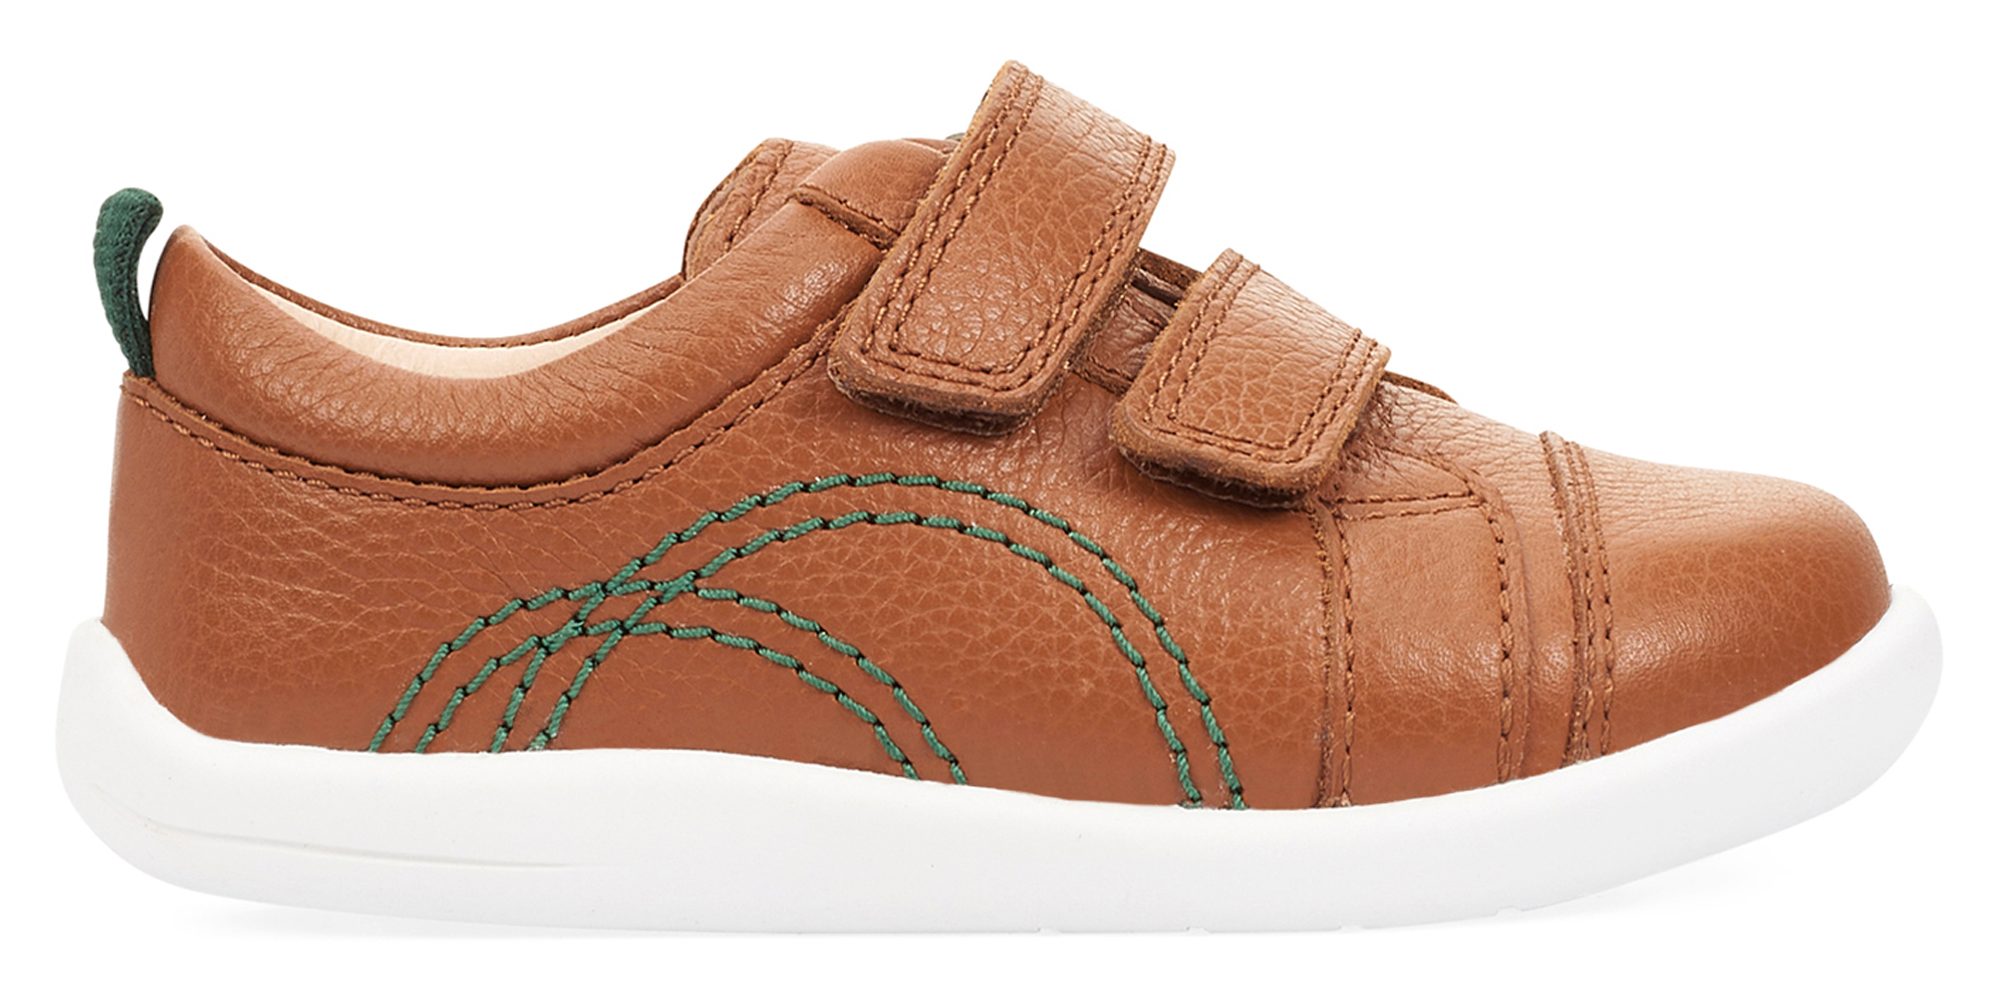 Start-Rite Tree House Tan Leather 0781_0 - Boys Shoes - Humphries Shoes